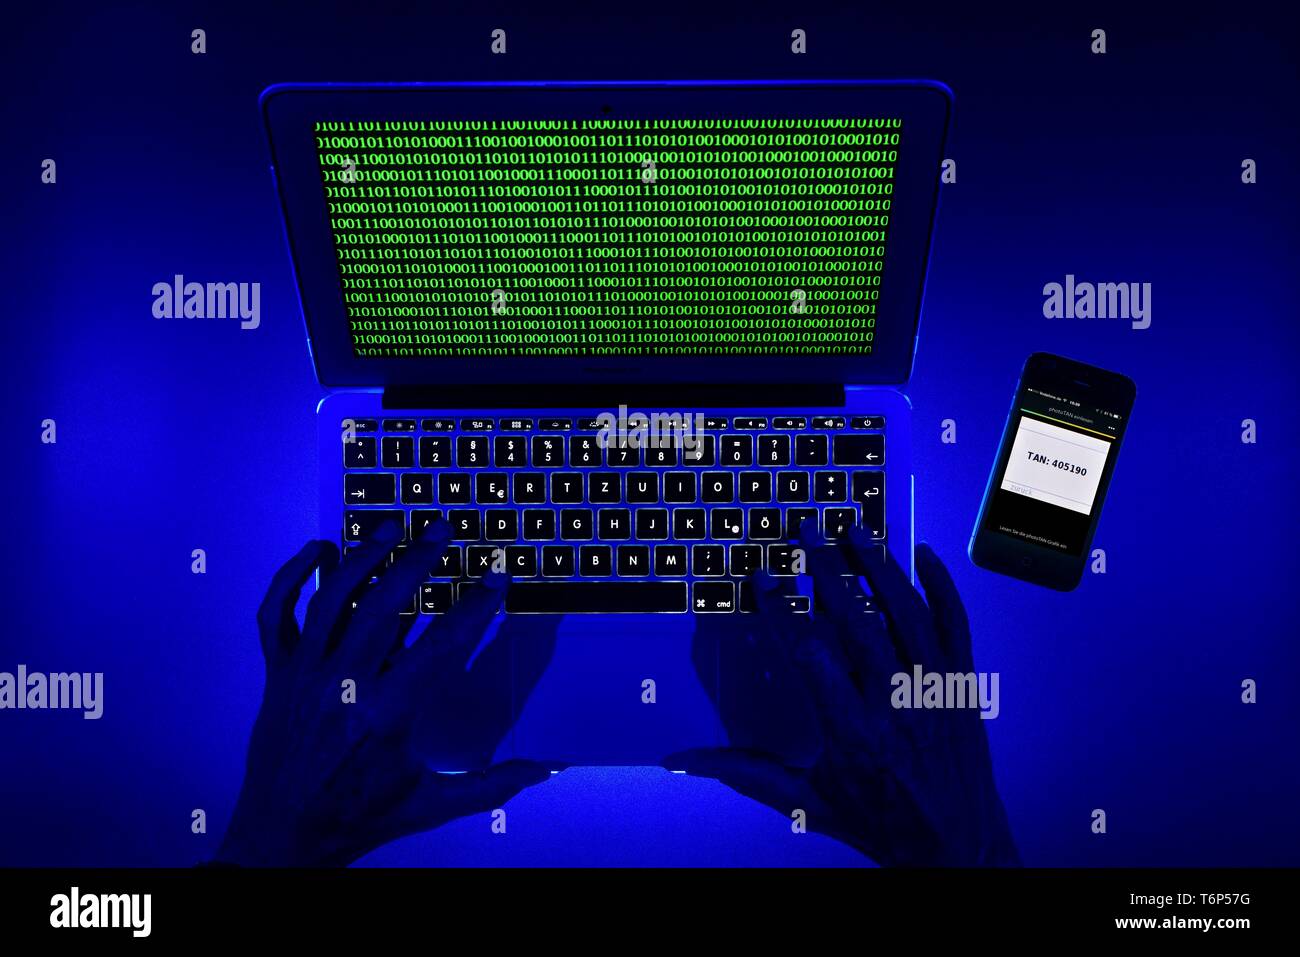 Smartphone for Push-TAN input next to computer keyboard, hands, symbol image cybercrime, hacker attack, Baden-Wurttemberg, Germany Stock Photo